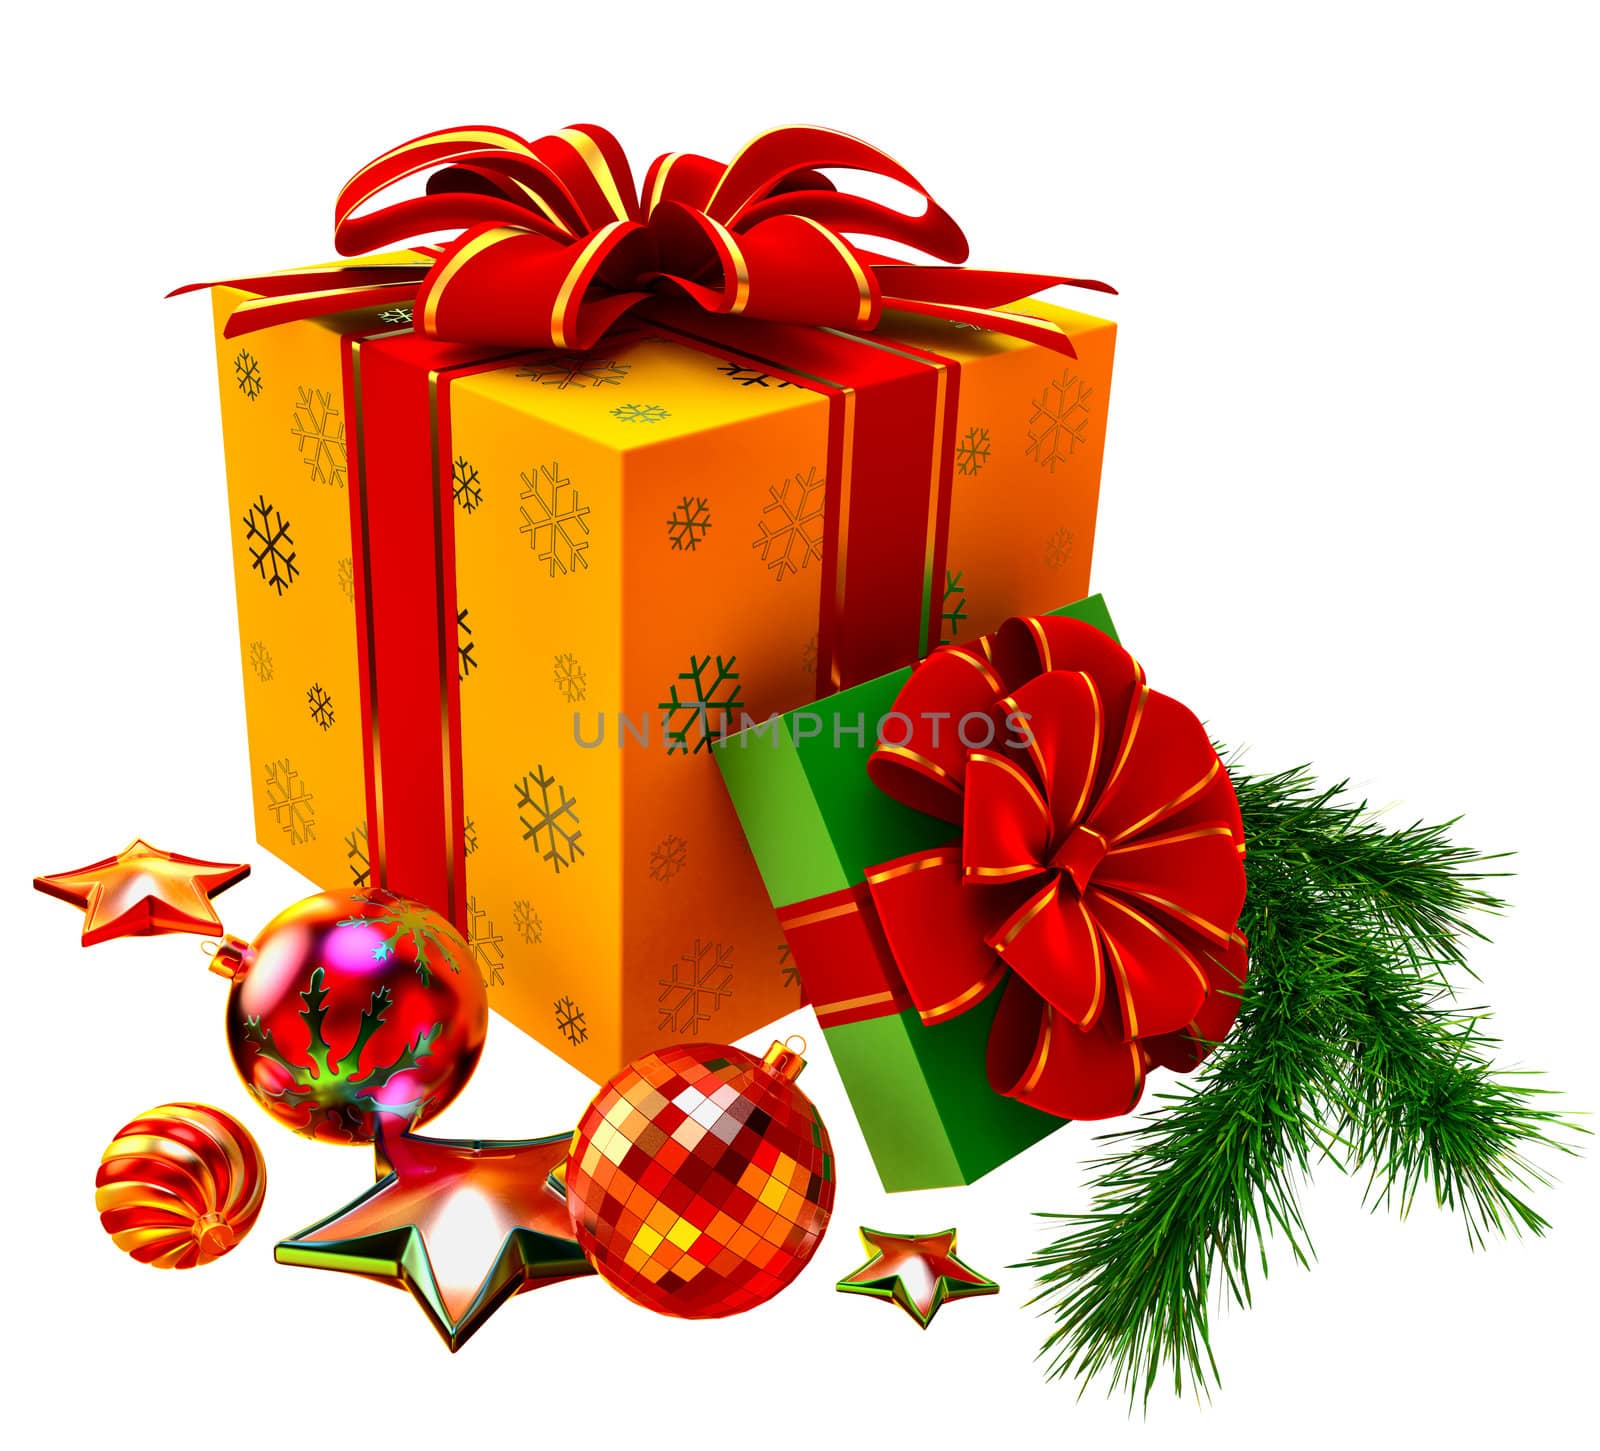 Christmas tree toys and set of yellow and green boxes ornamented with the snowflakes and decorated by red bows as gifts